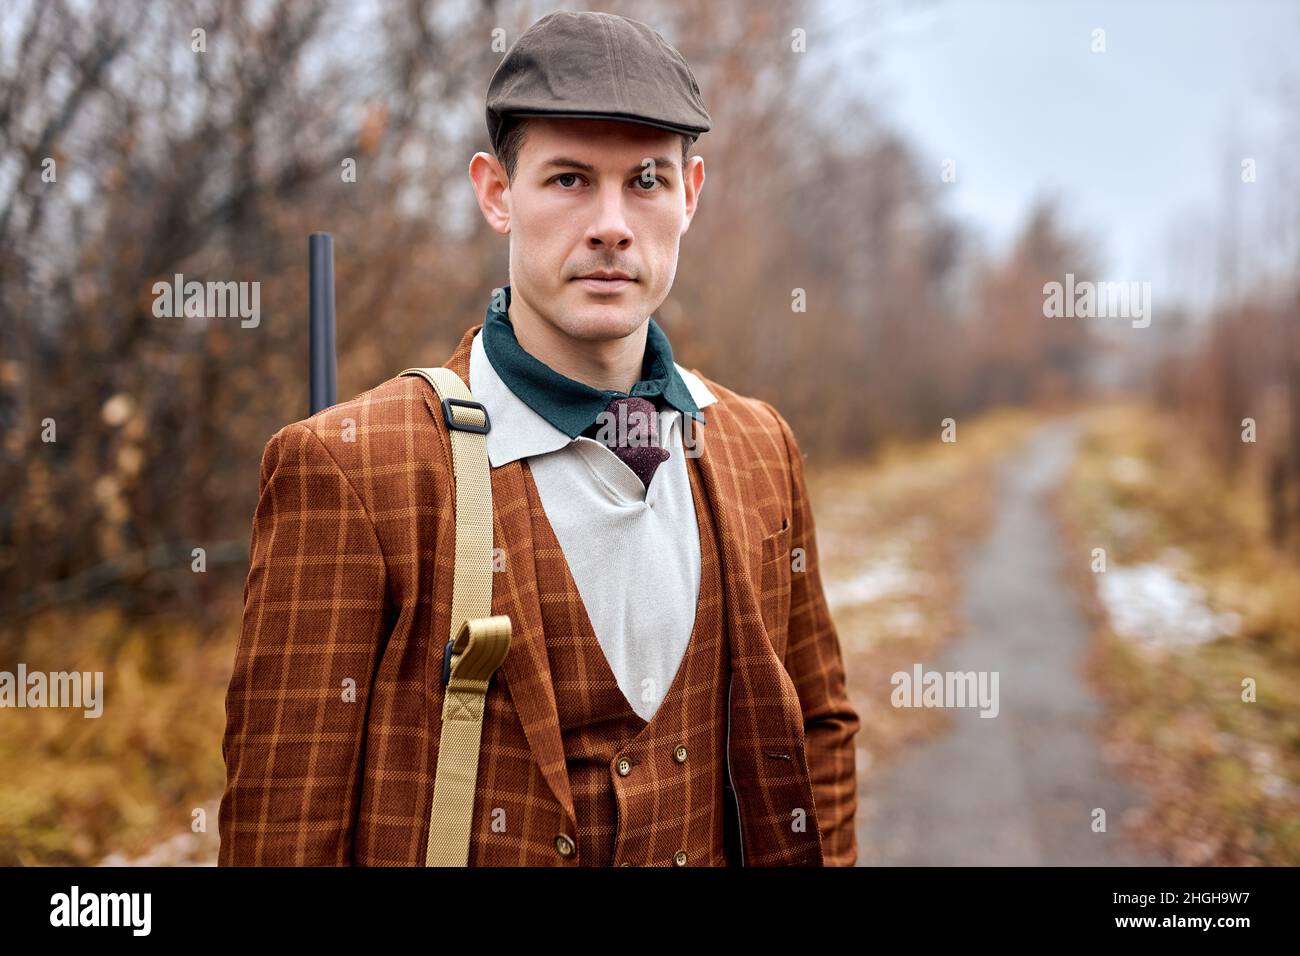 Autumn hunting season. Hunter with shotgun gun on hunt. Autunm hunting. Handsome guy of caucasian appearance in brown classic suit posing looking at c Stock Photo